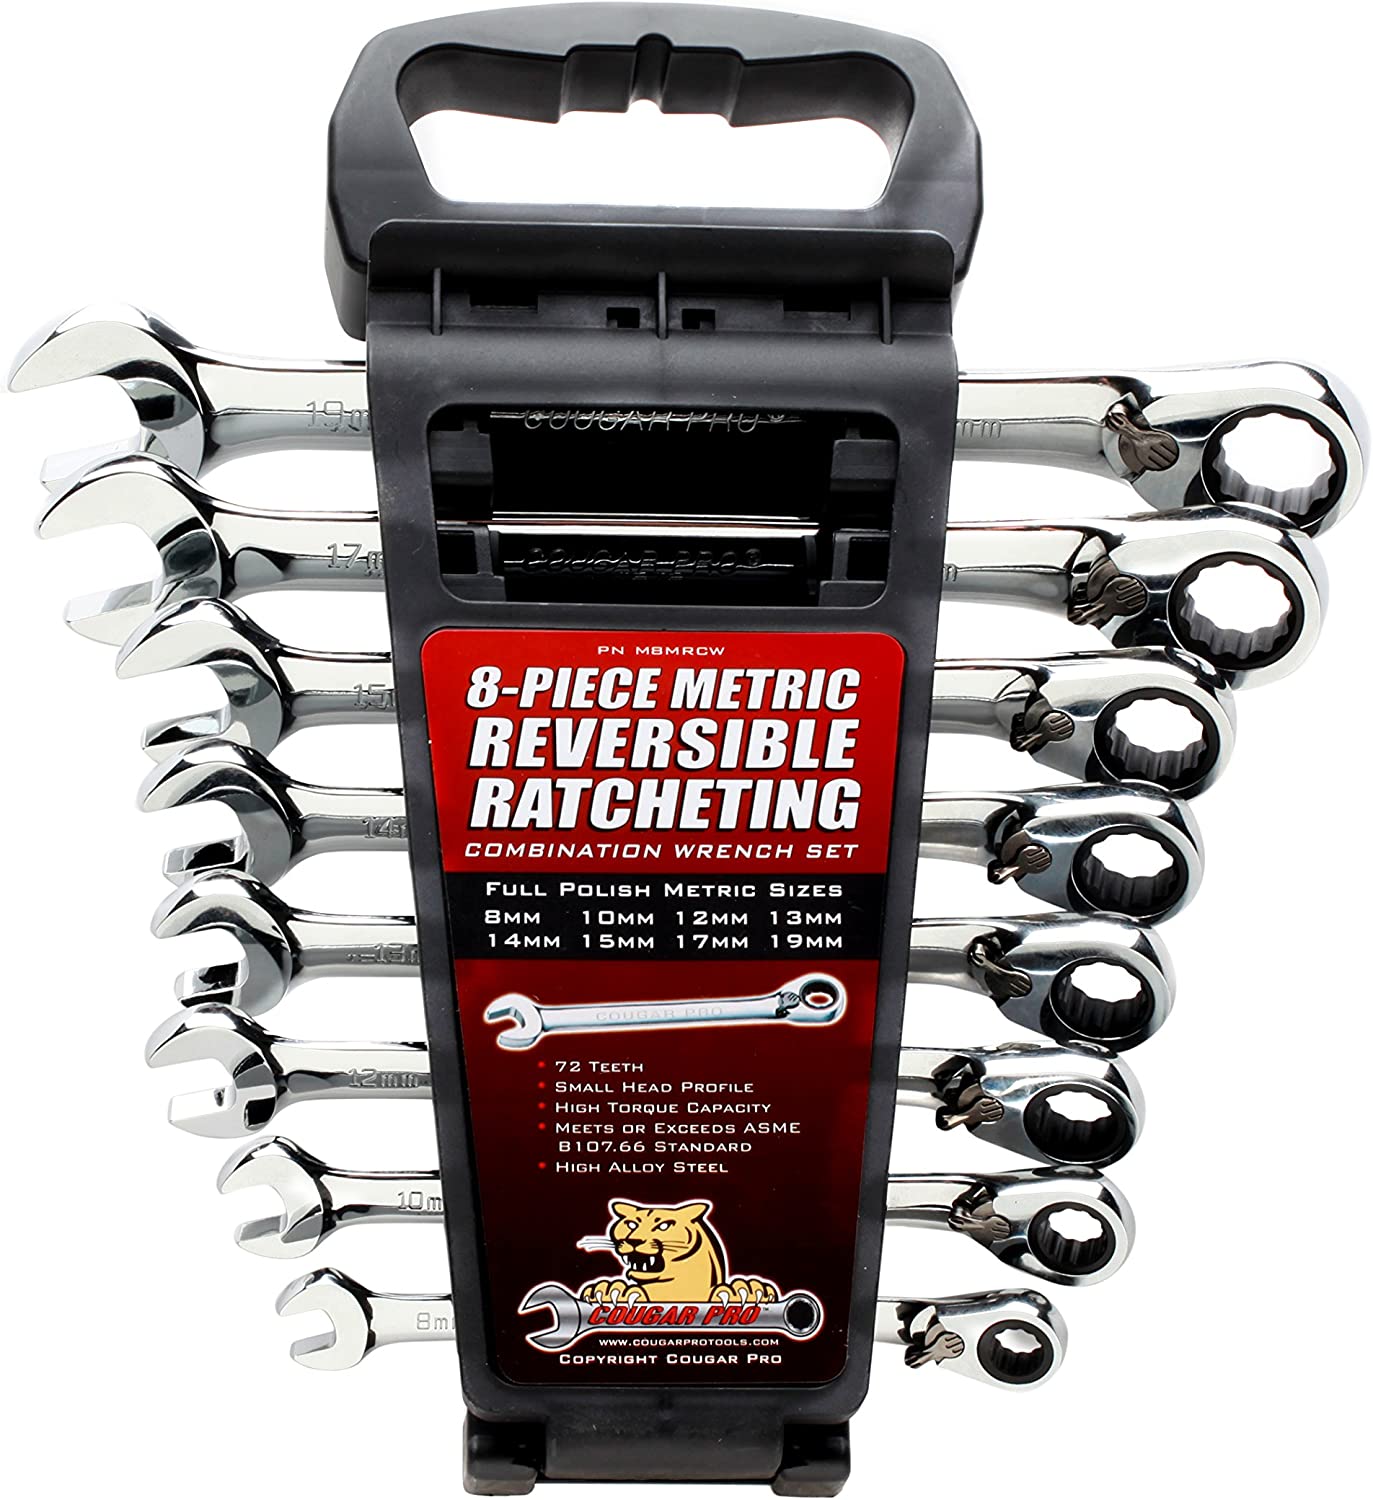 Cougar Pro Reversible Ratcheting Combination Wrench Set 8 Pieces Metric M8MRCW